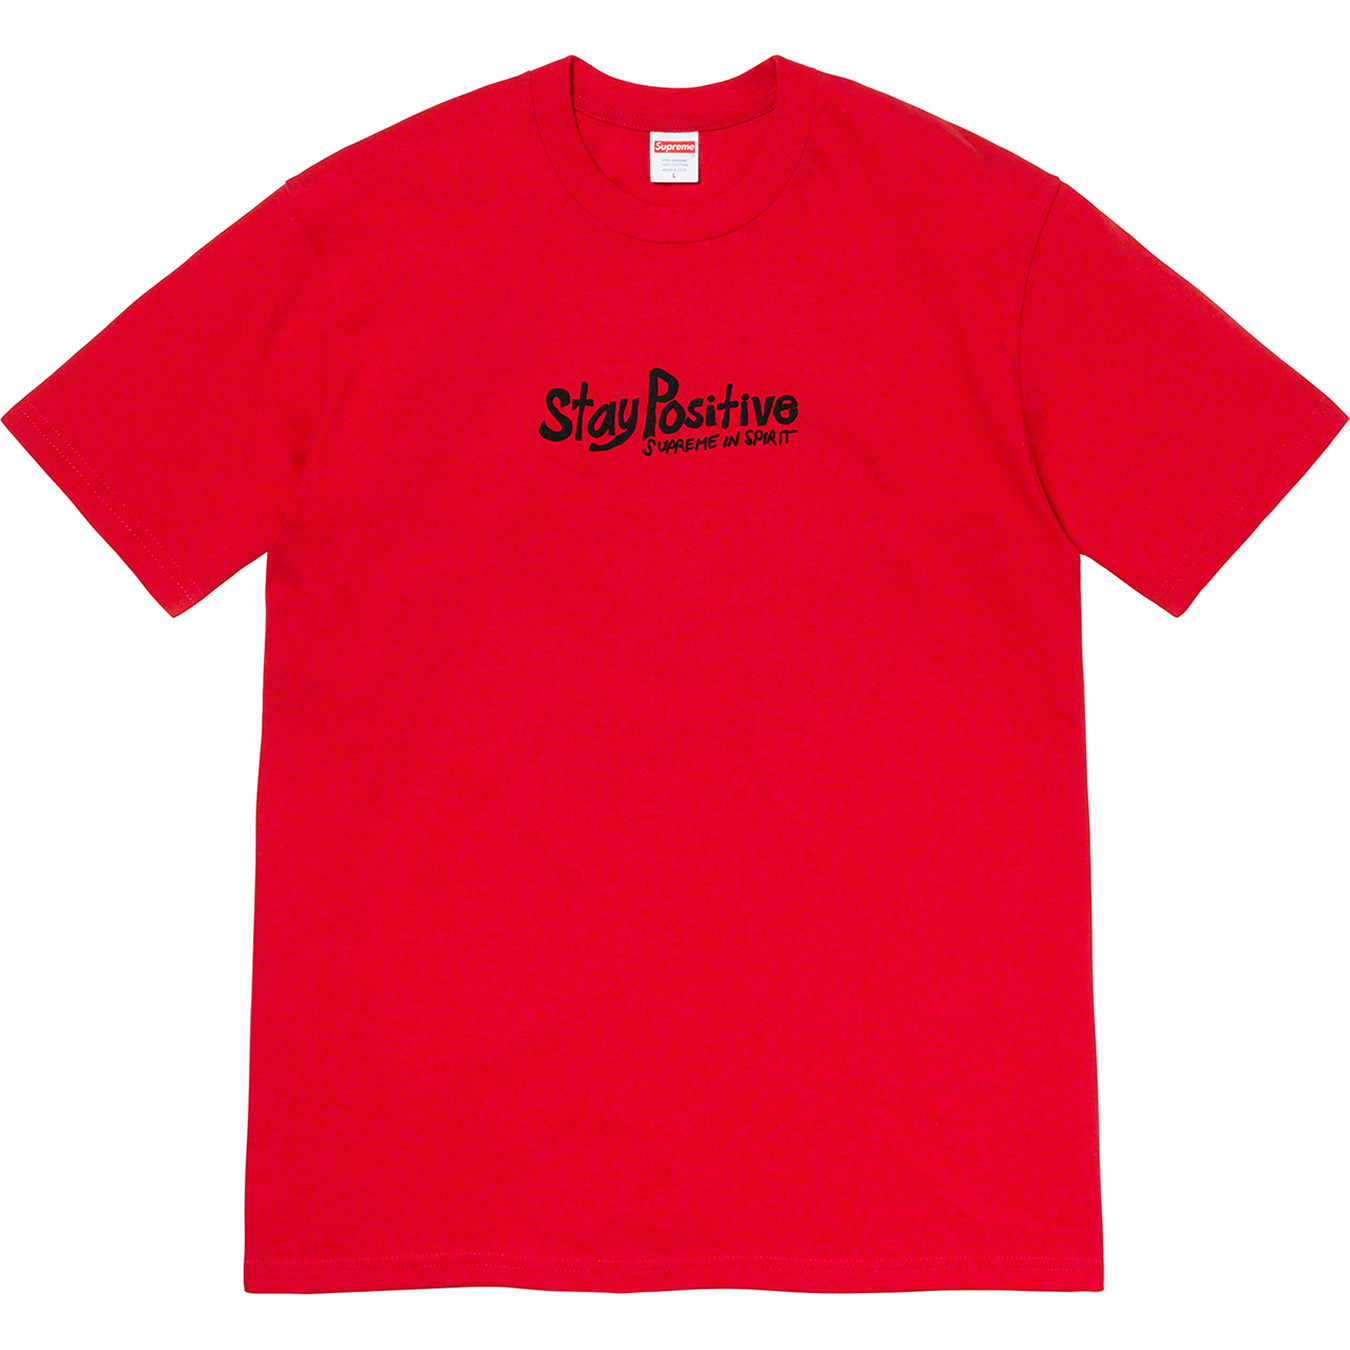 Stay Positive Tee - fall winter 2020 - Supreme